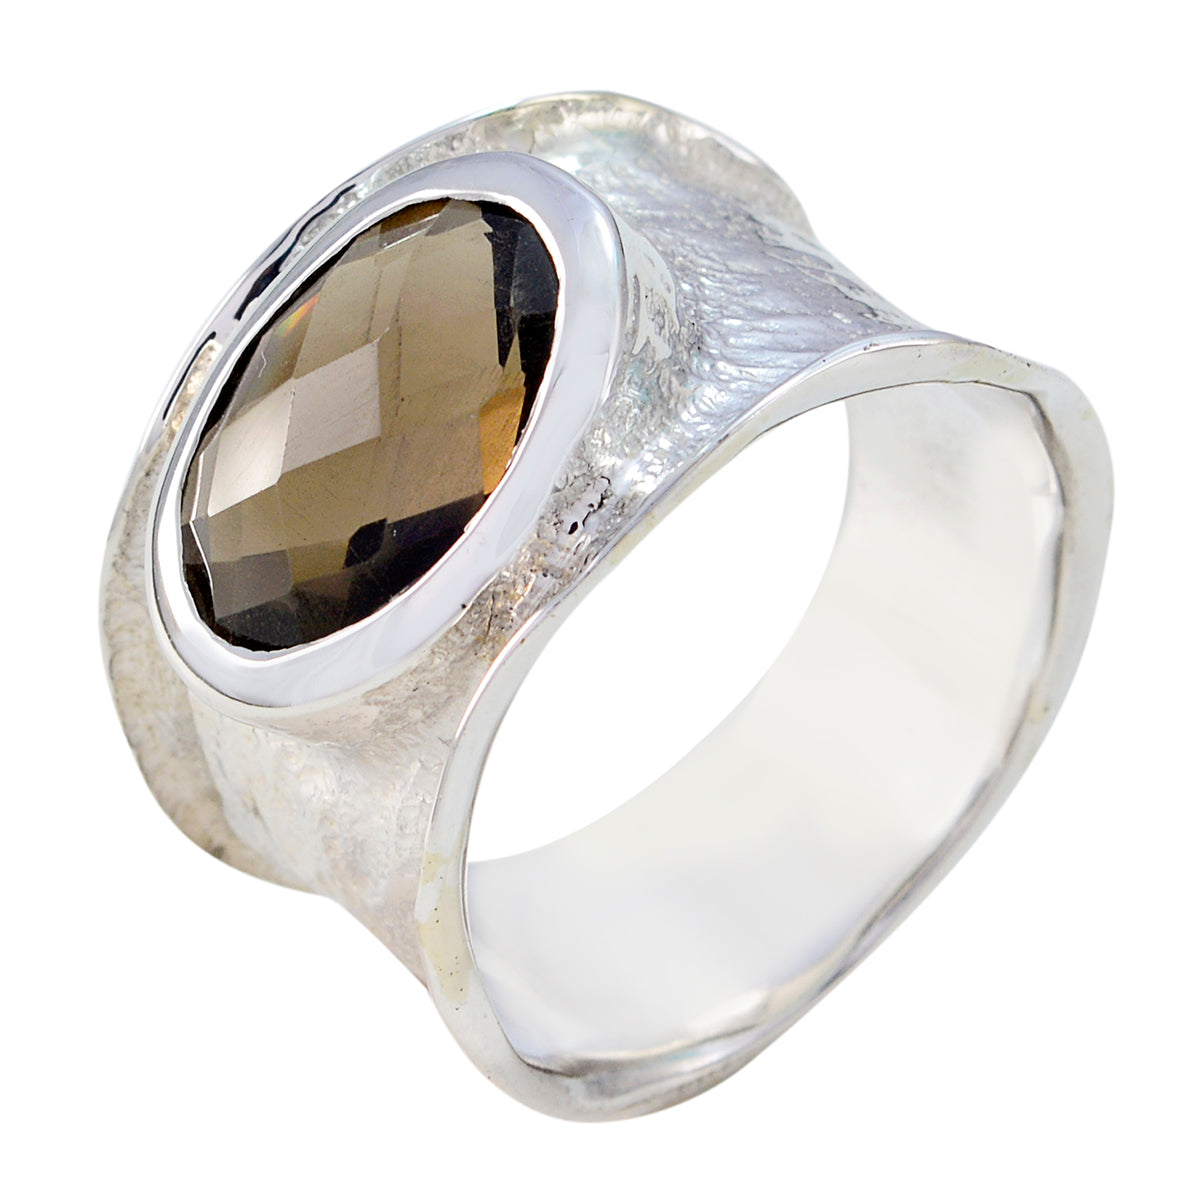 Chocolate-Box Gem Smoky Quartz 925 Sterling Silver Ring Jewelry For Her